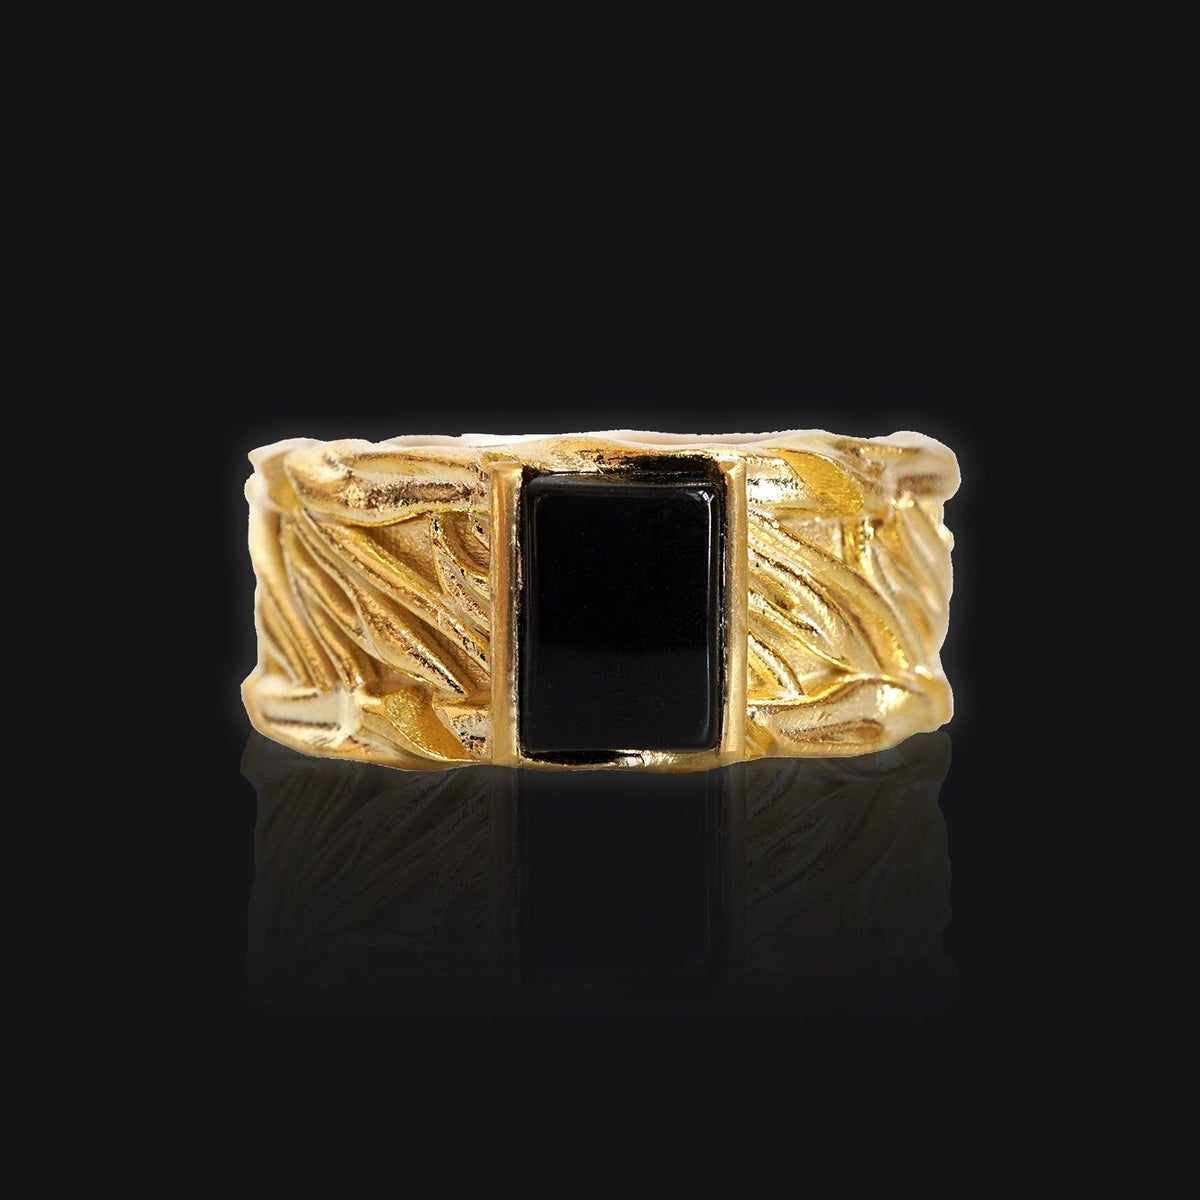 Byzantine Onyx Ring in Sterling Silver and 14K Gold, 9.8mm - Tippy Taste Jewelry